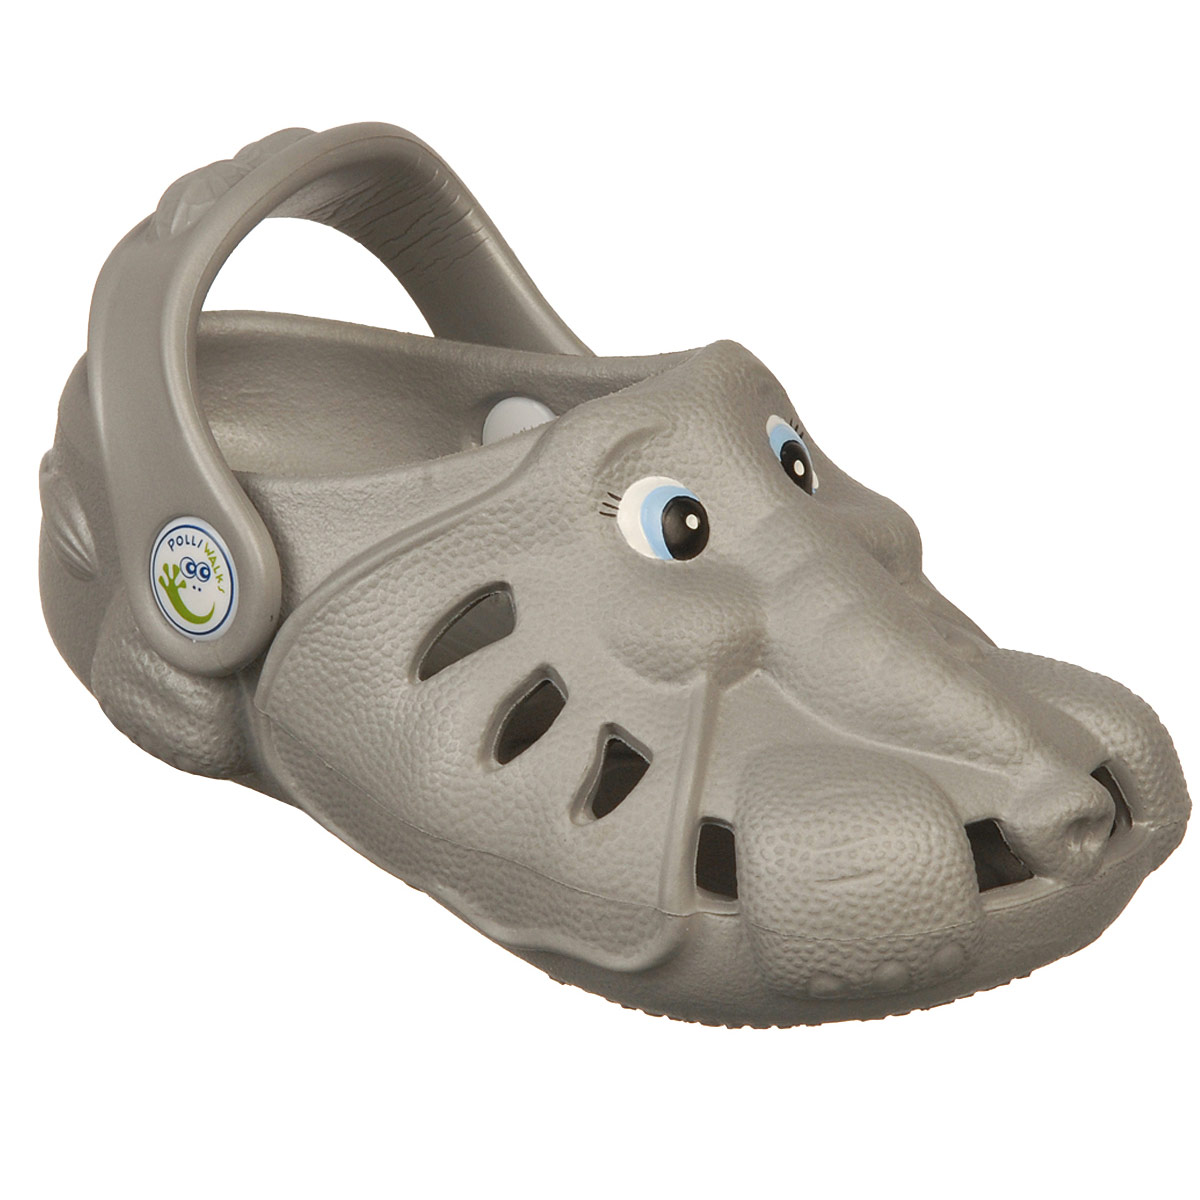 Polliwalks : Toddler shoes Ethan the ELEPHANT Gray # 11